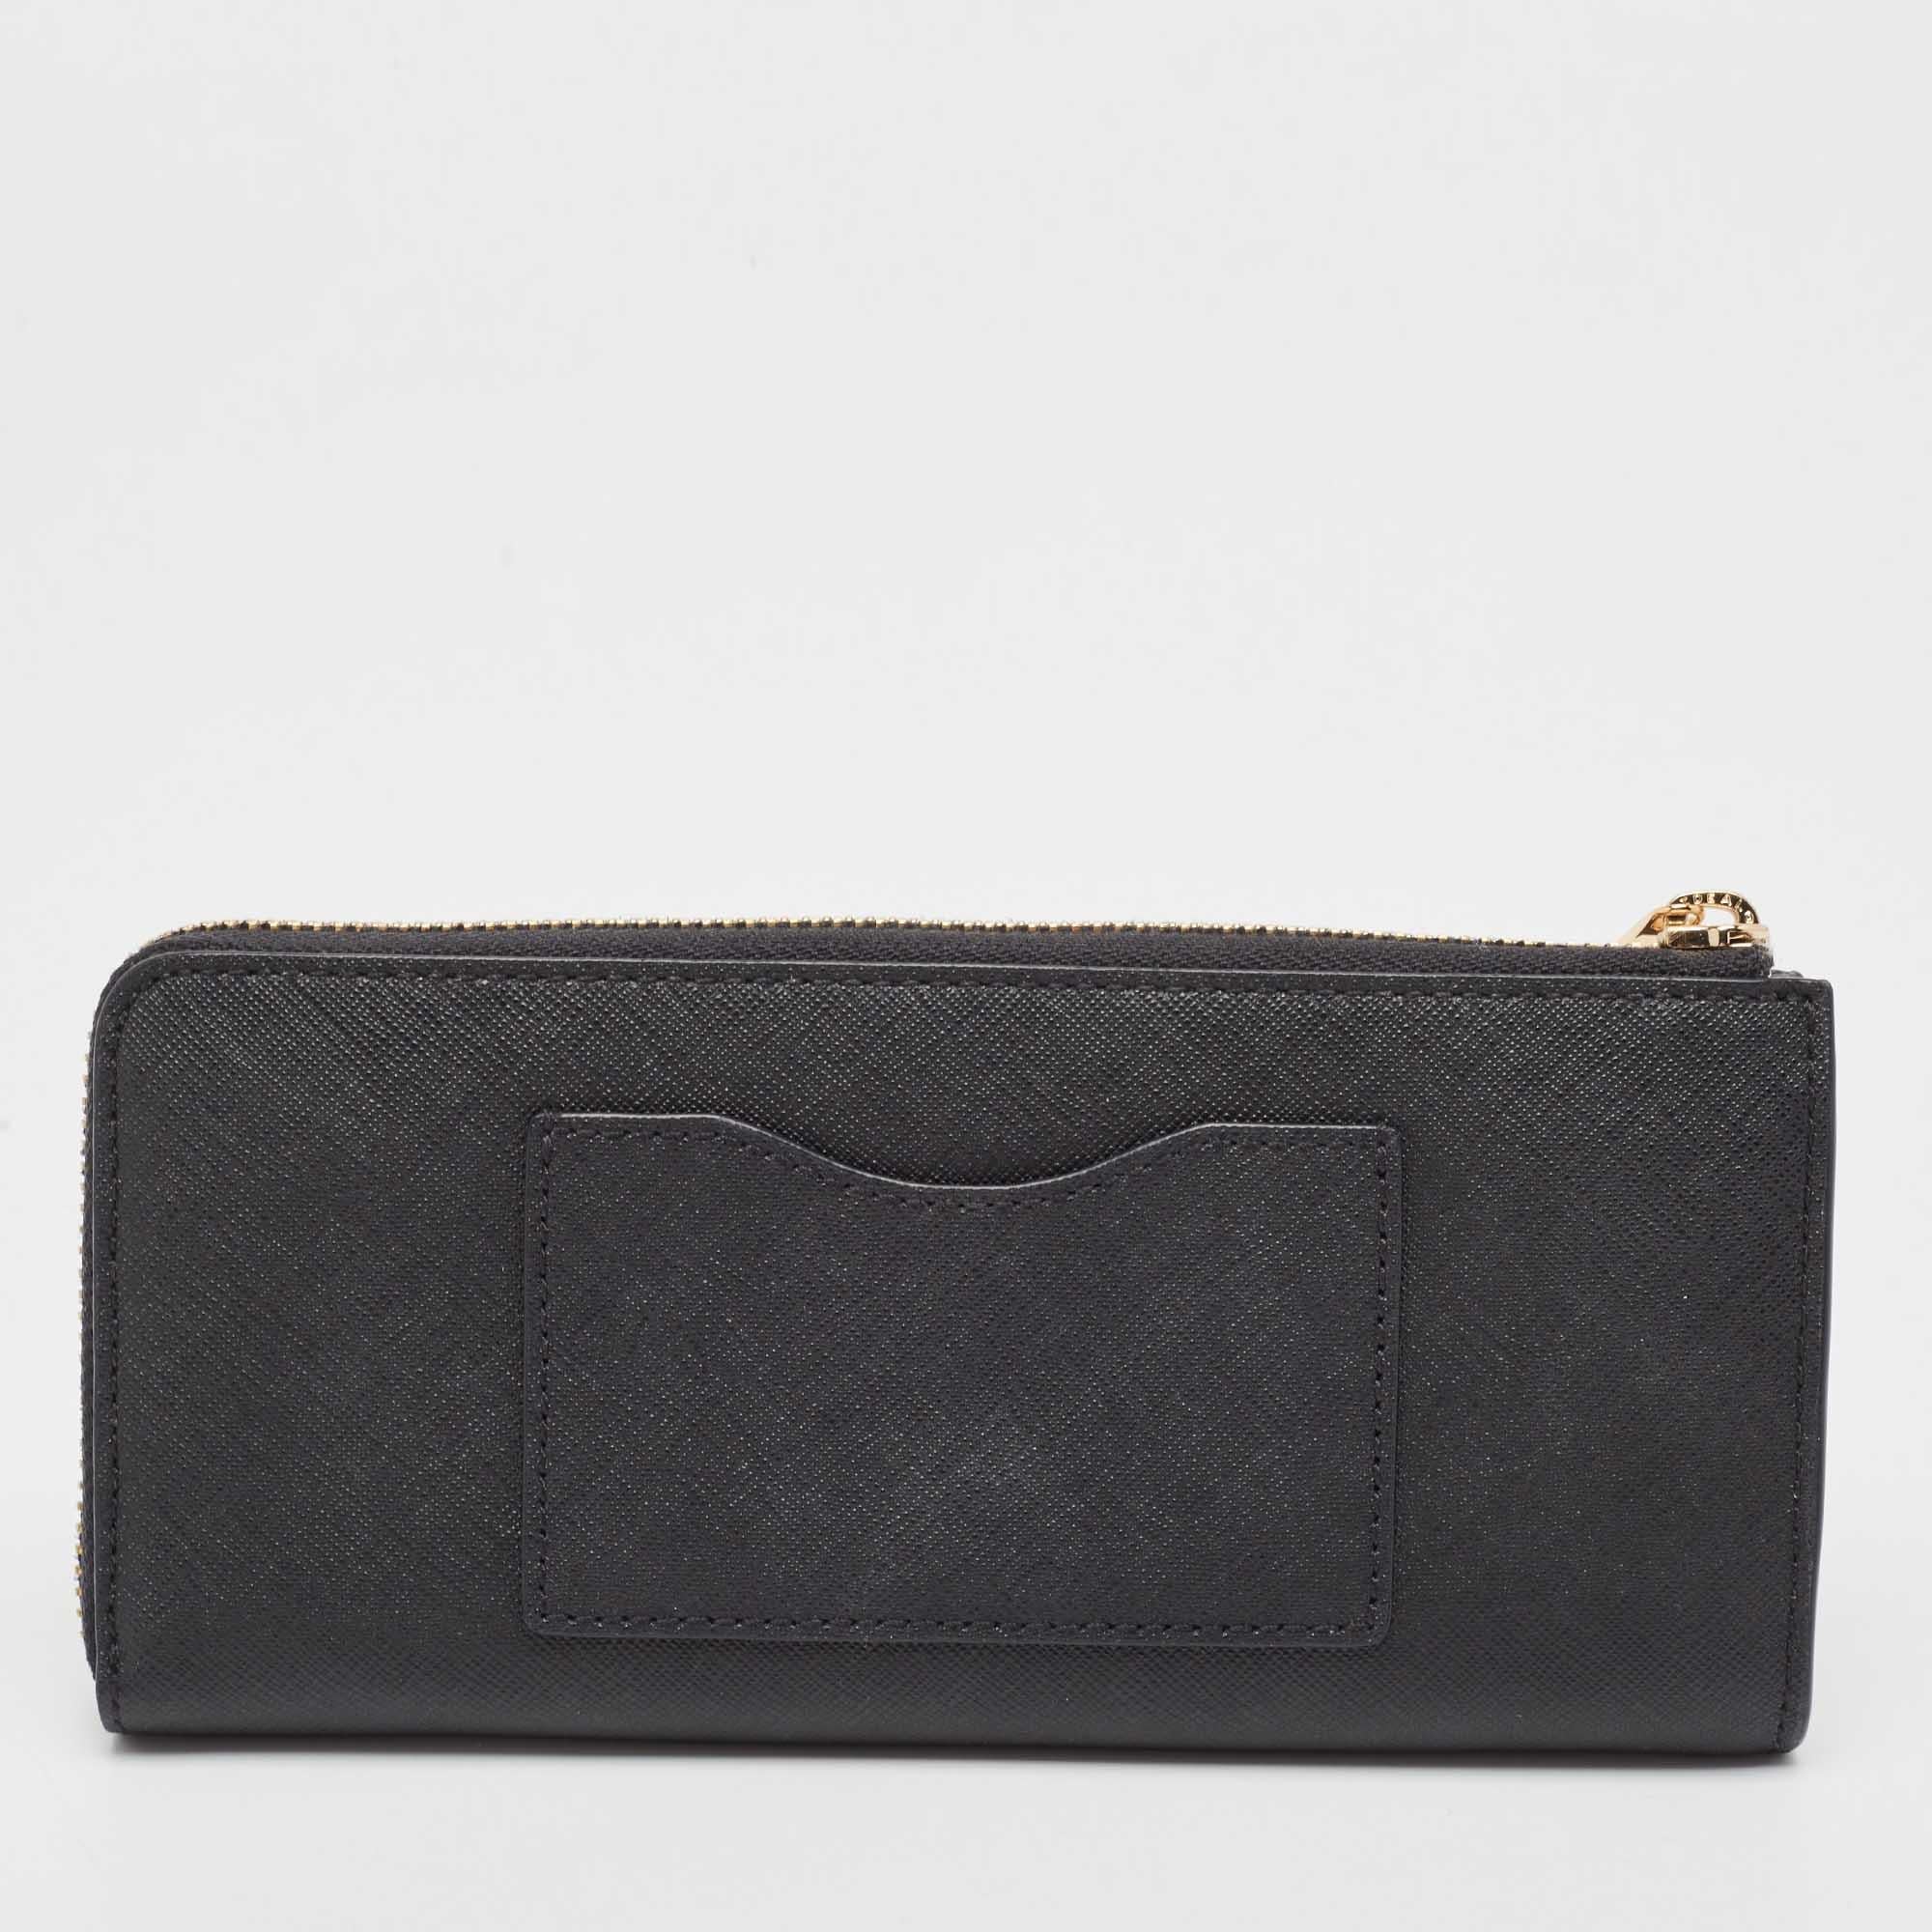 This wallet is conveniently designed for everyday use. It comes with a well-structured interior for you to neatly arrange your cards and cash. This stylish piece is complete with a sleek appeal.

Includes: Brand Tag, Receipt